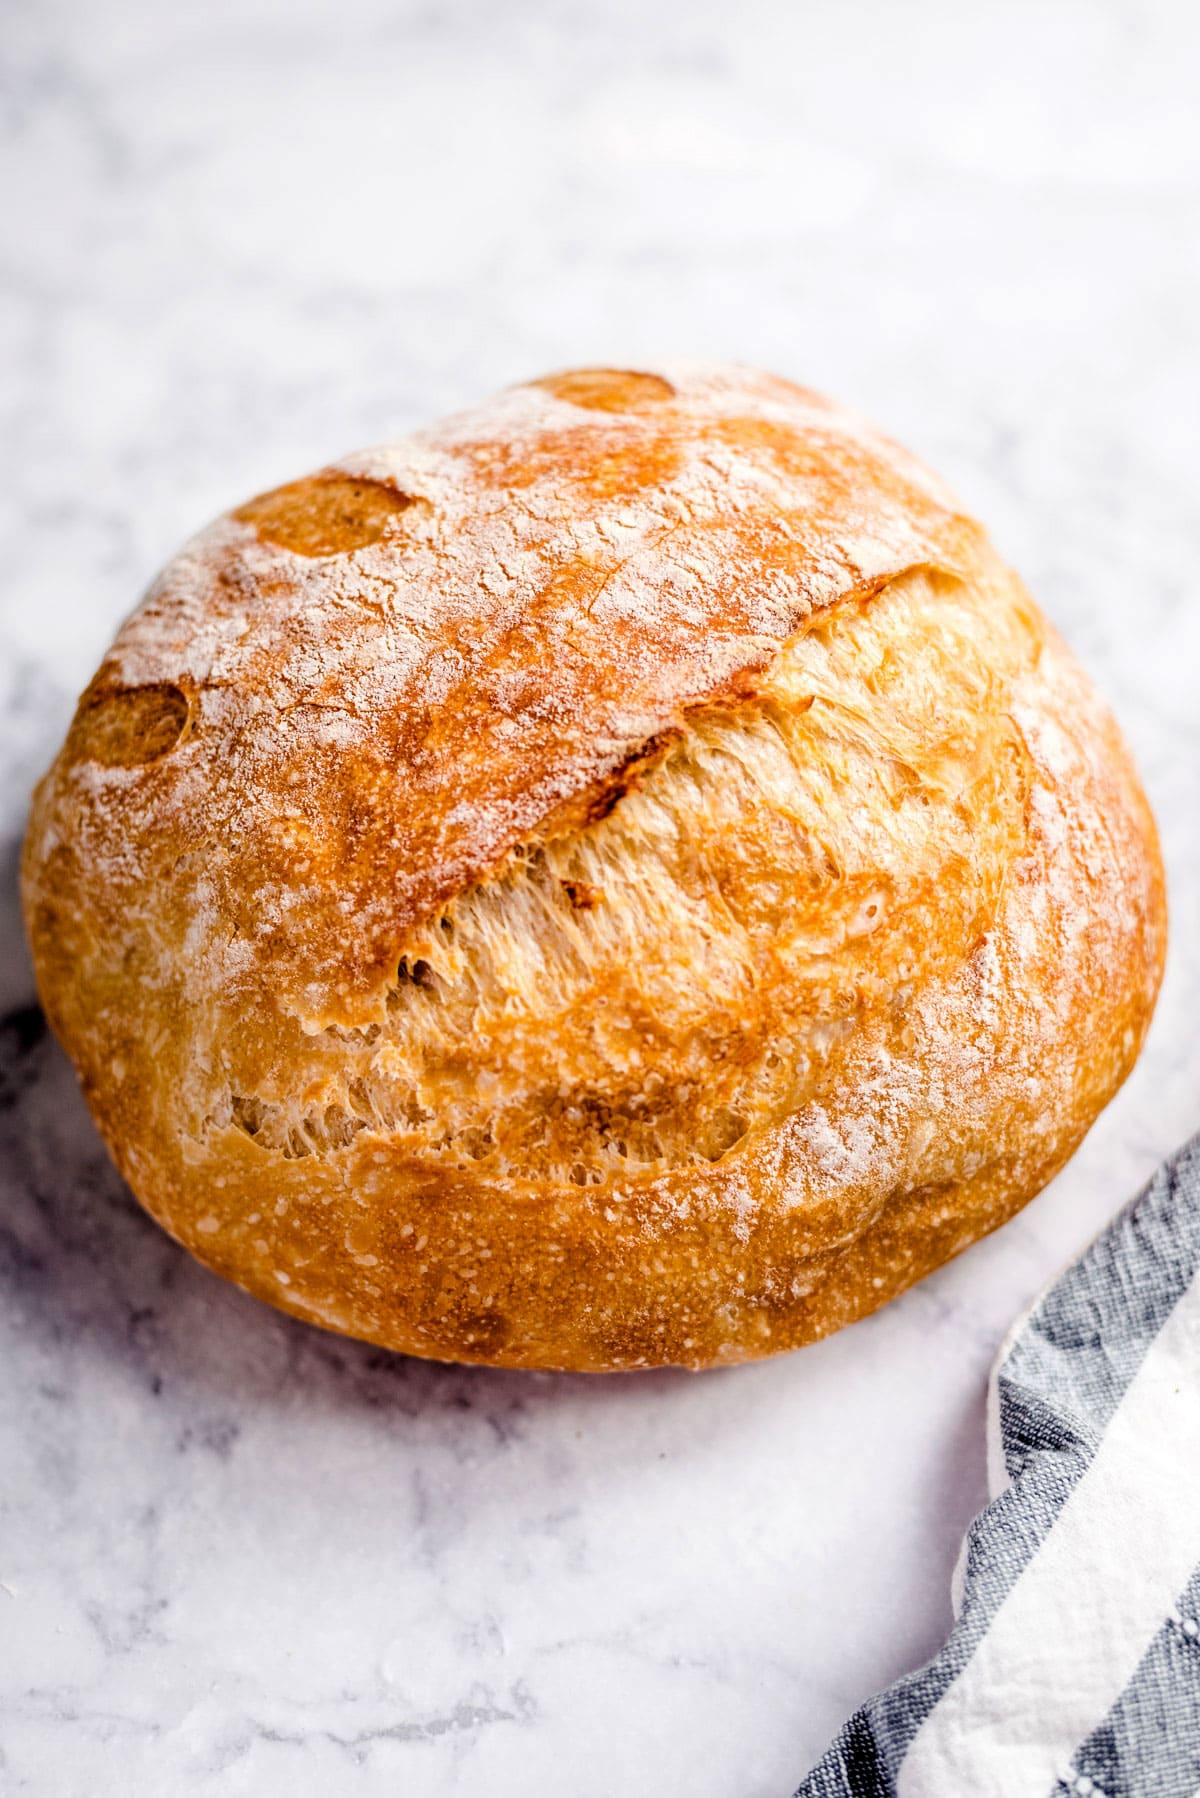 Le Creuset's New Bread Oven Achieves a Perfectly Crusty Loaf, Recipe